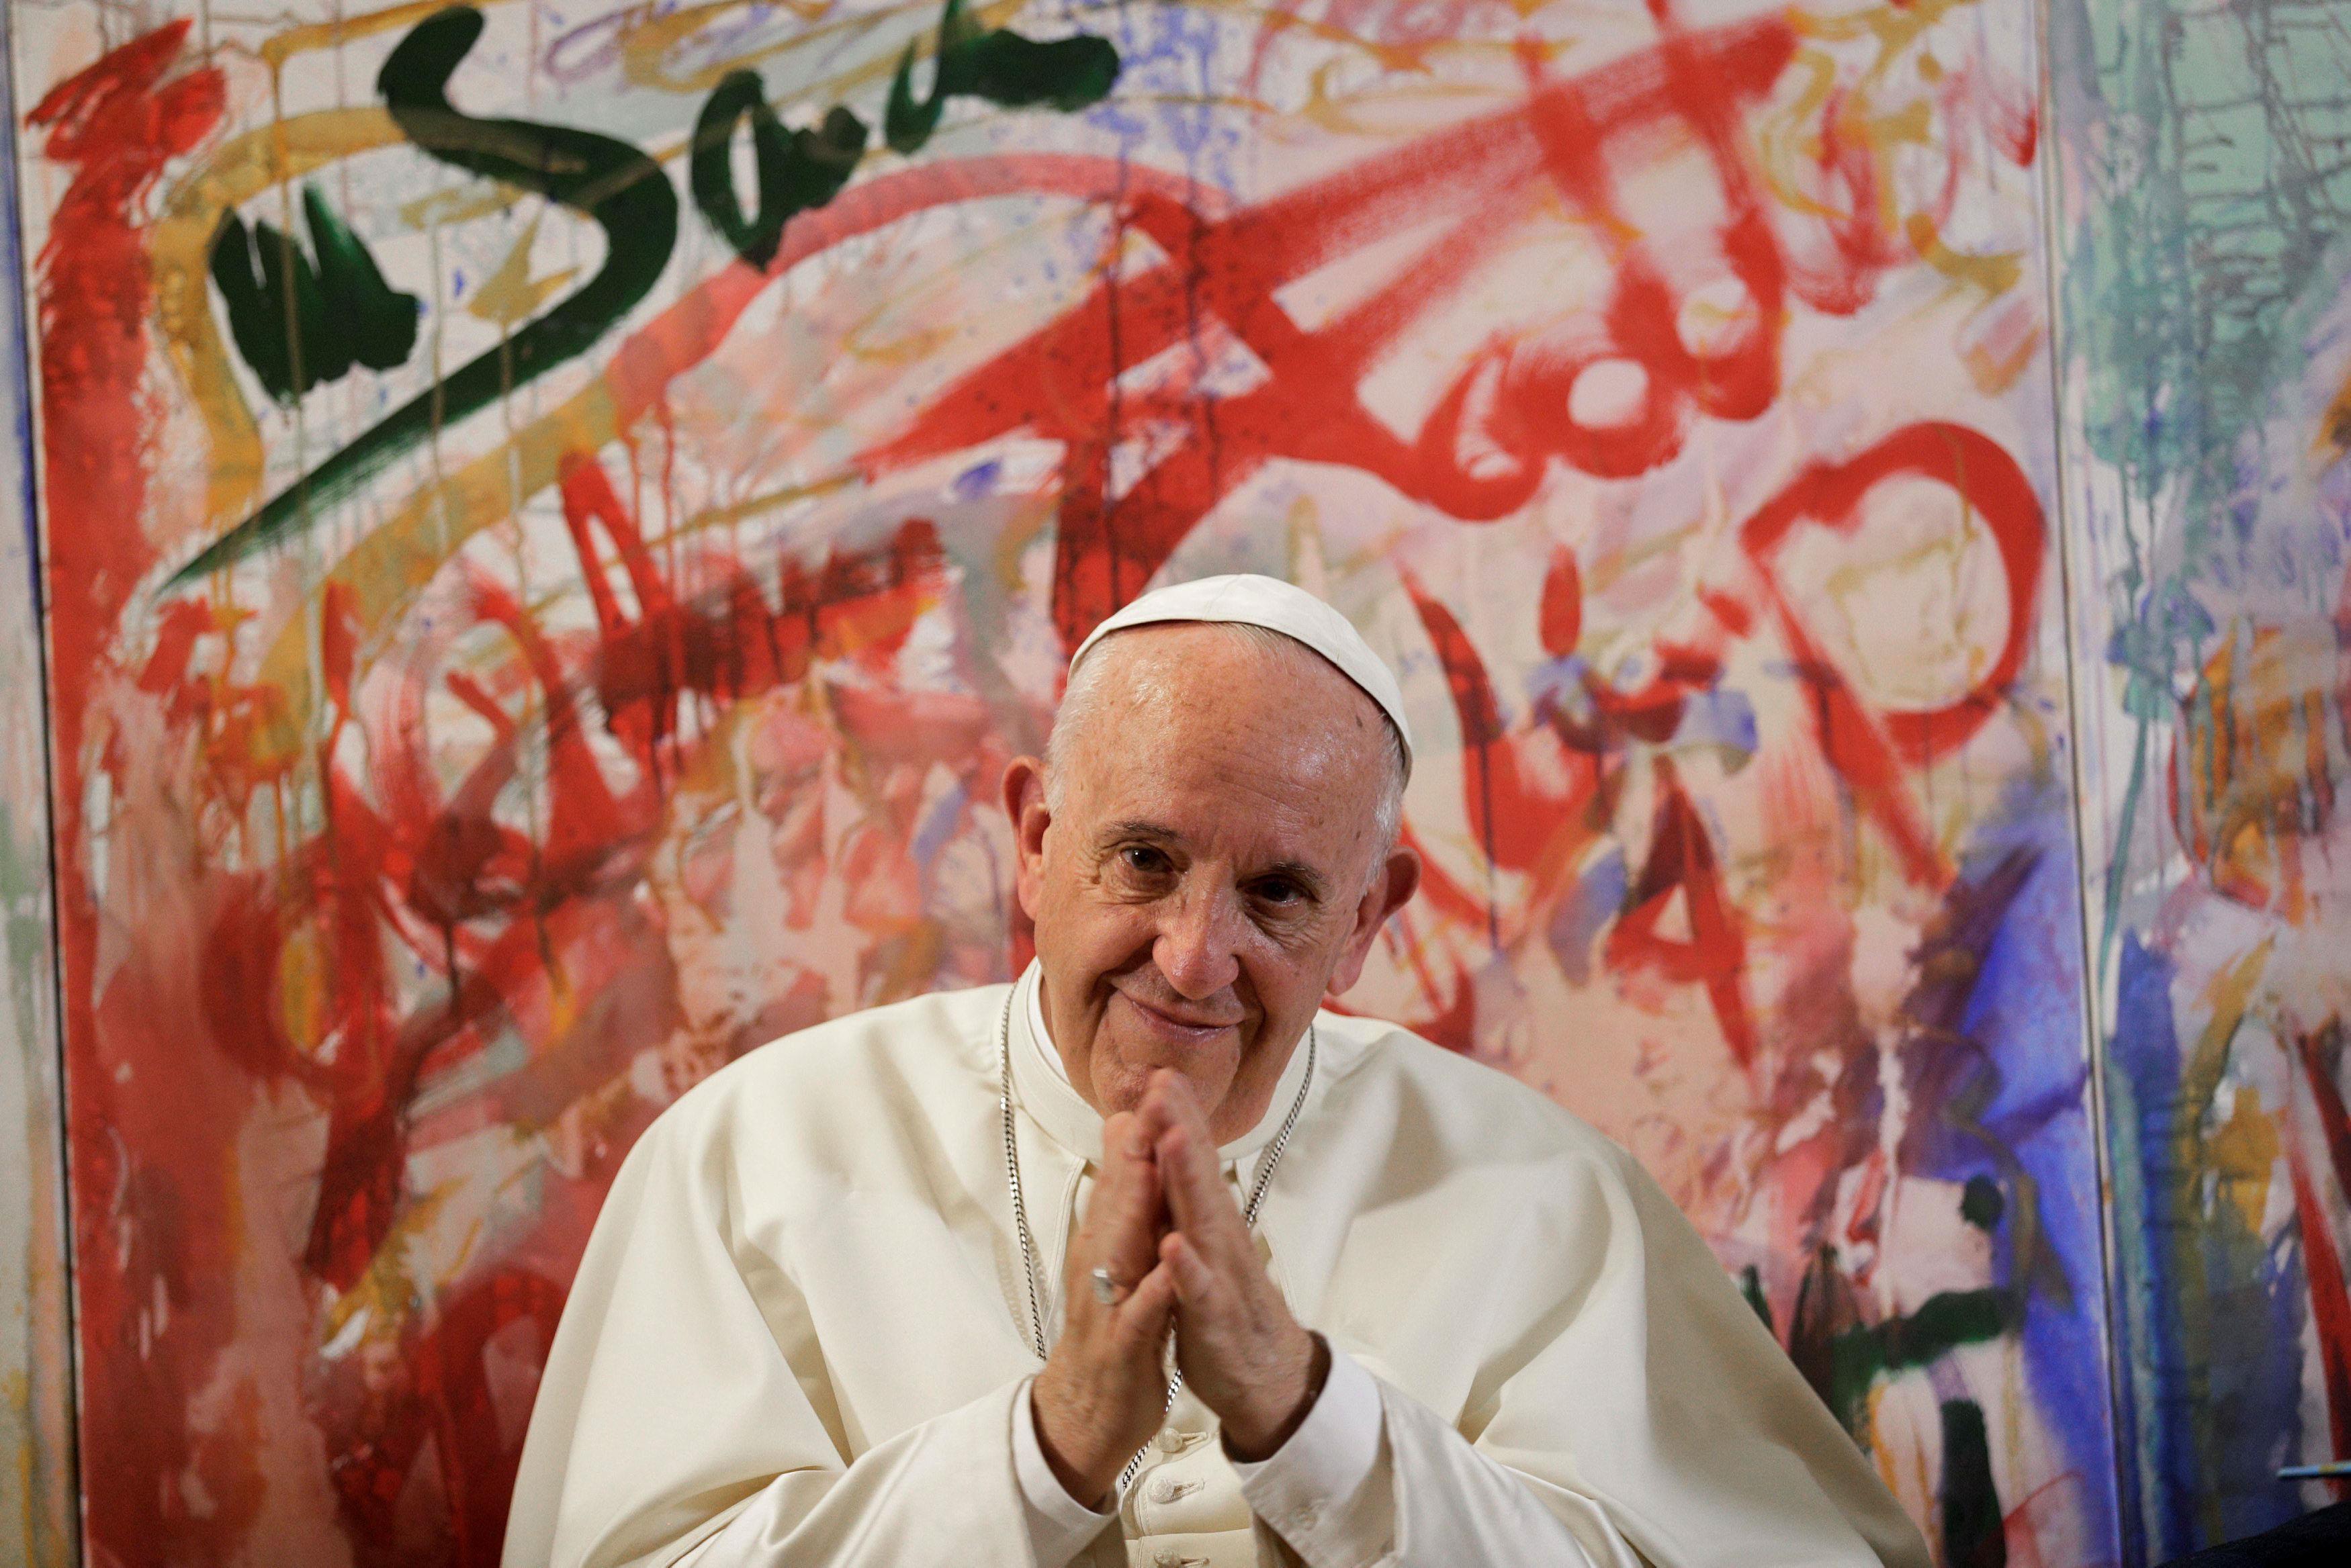 Pope Francis gestures during his visit at the Scholas Occurentes foundation in Rome